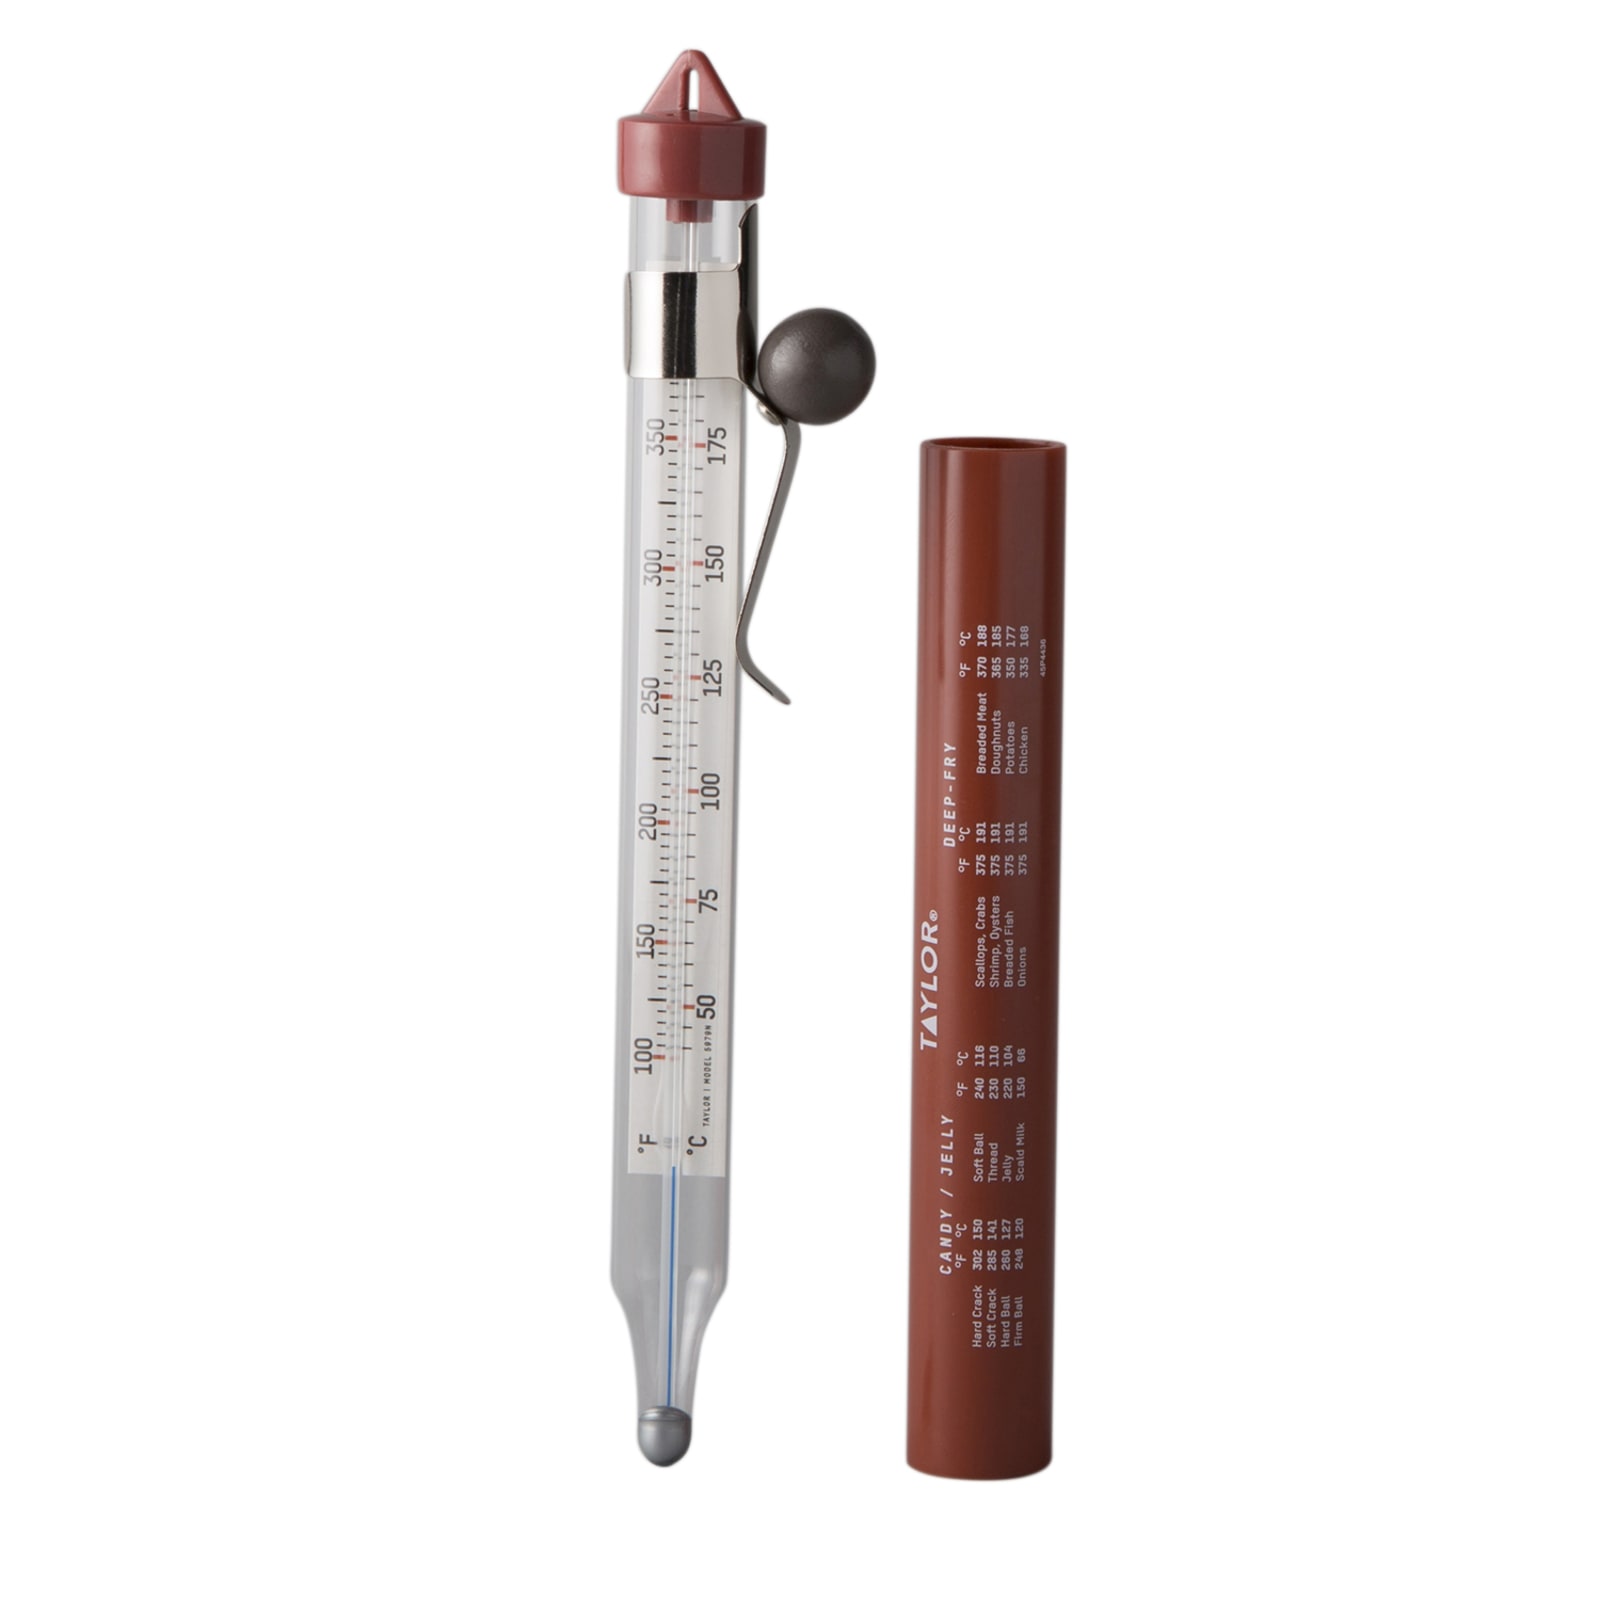 Taylor Indoor/Outdoor Digital Thermometer with Remote at Tractor Supply Co.